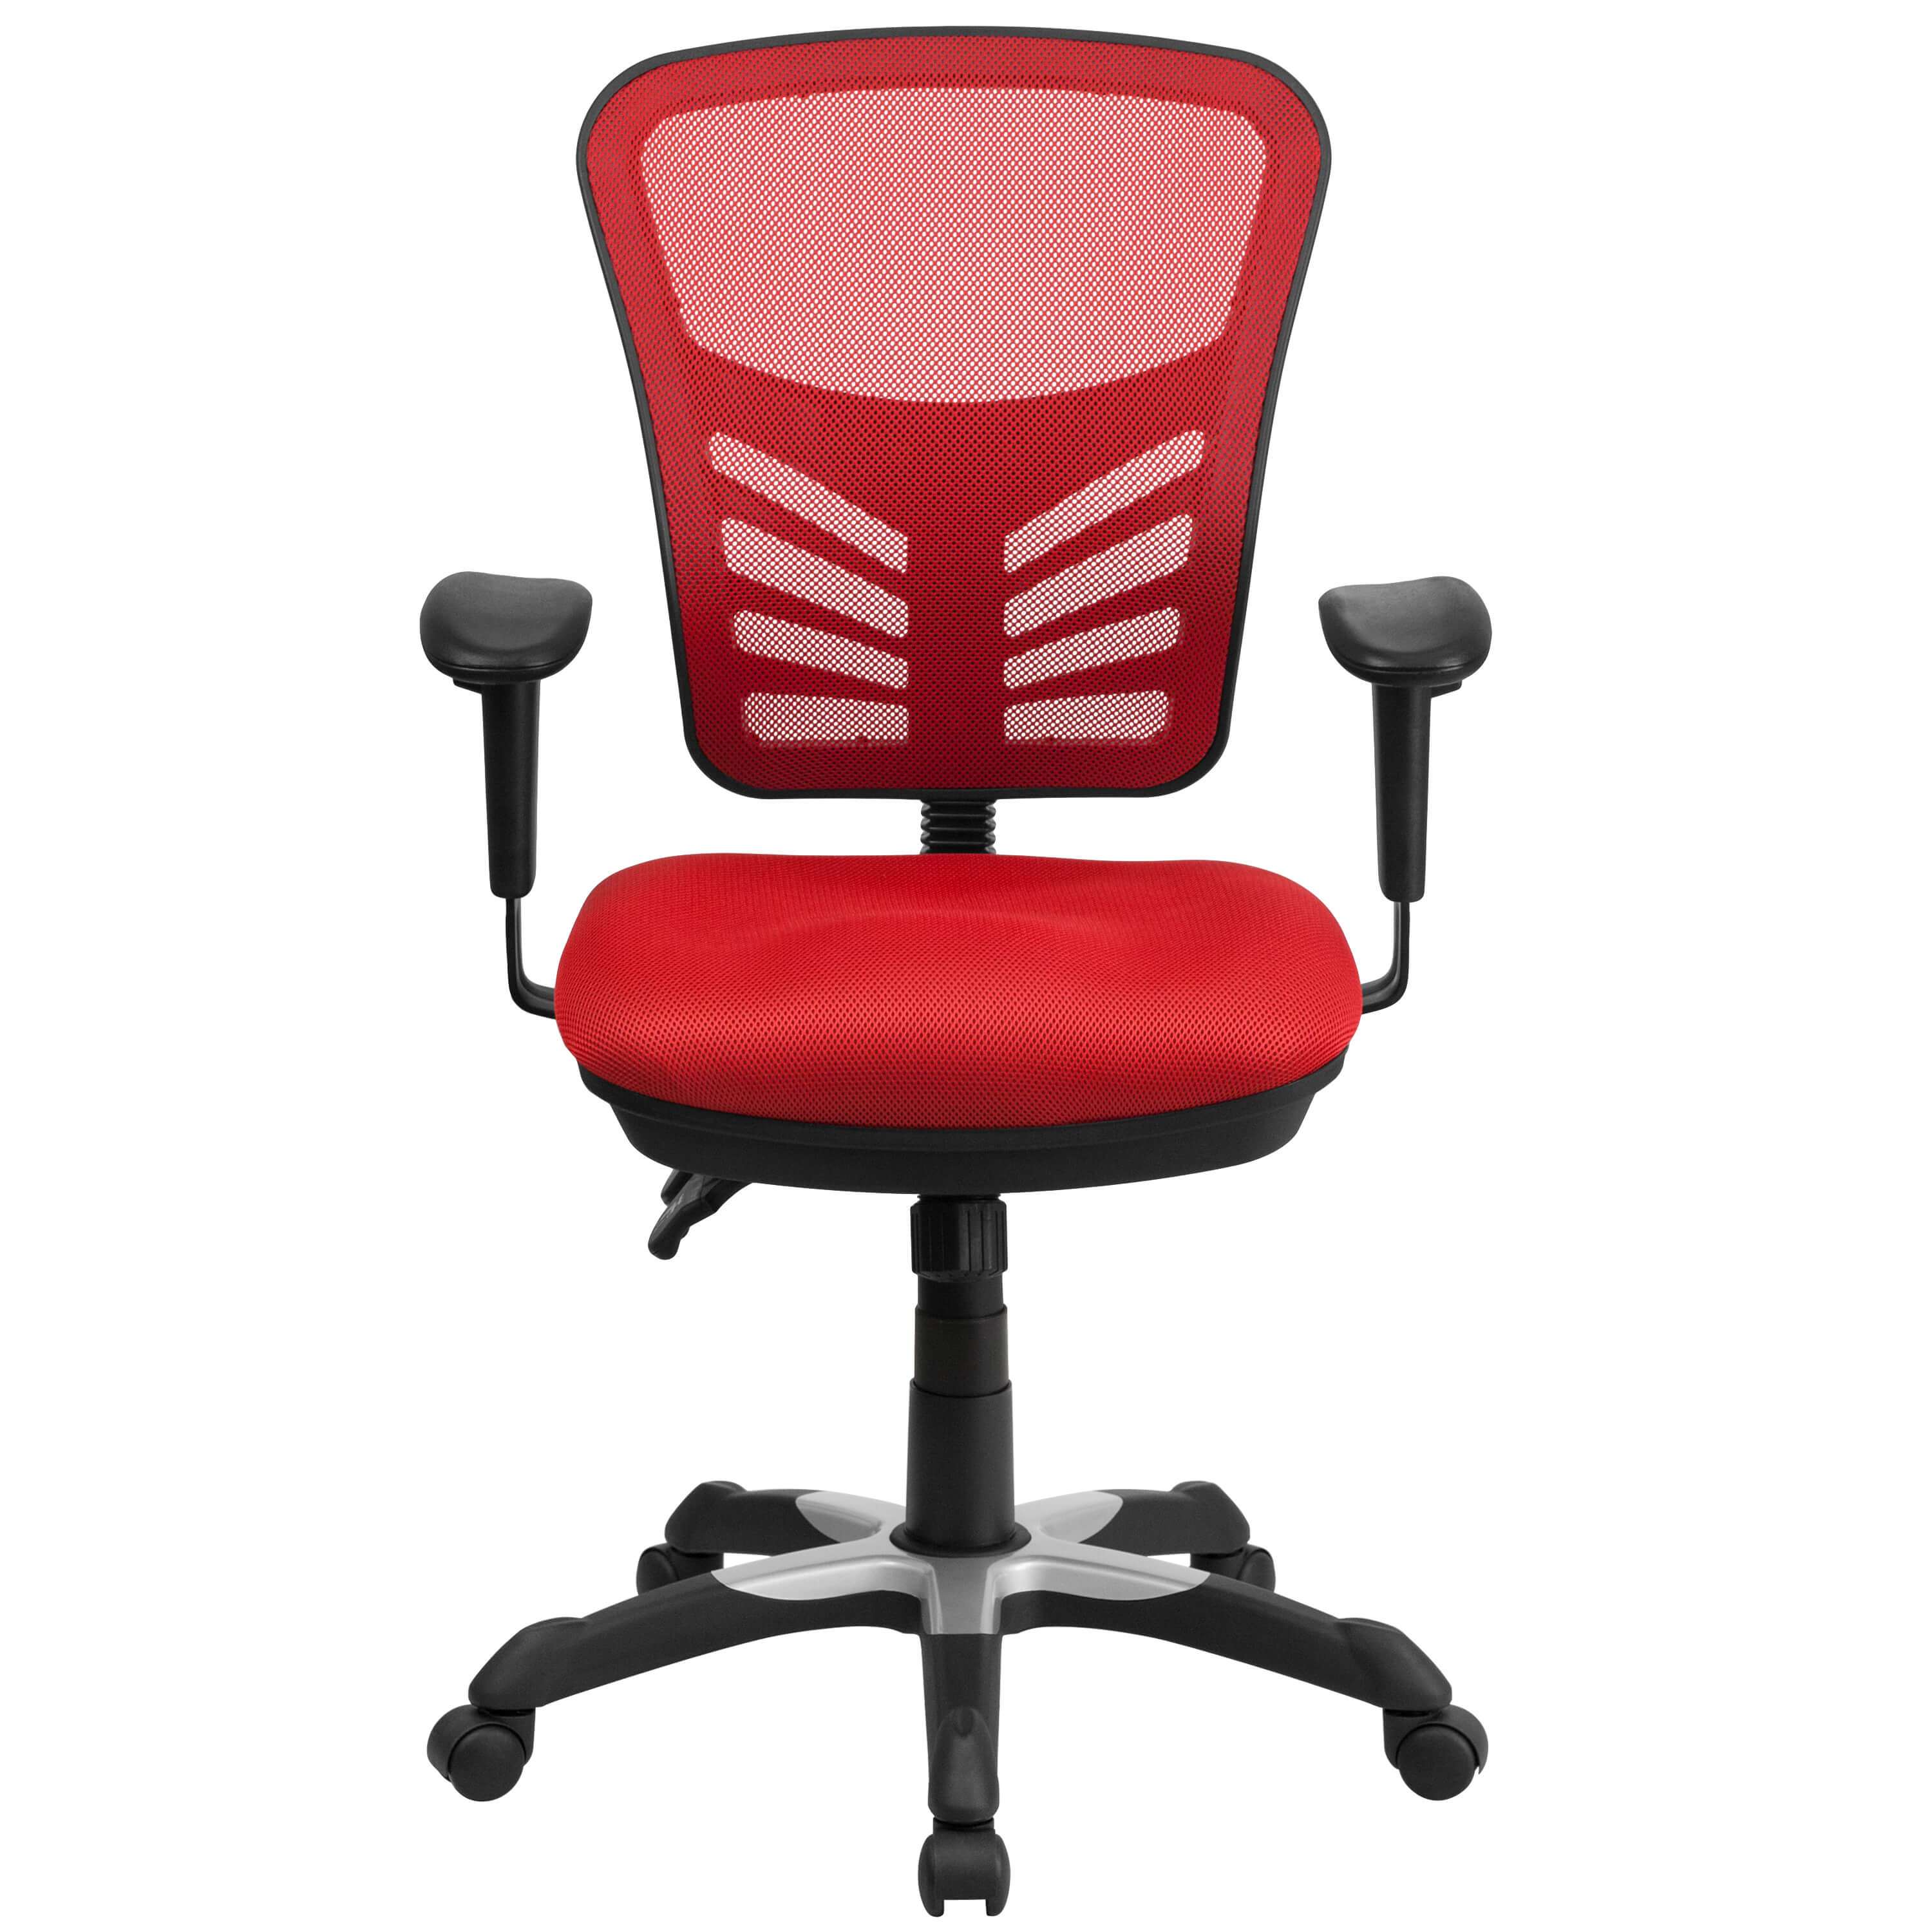 Colorful desk chairs CUB HL 0001 RED GG FLA